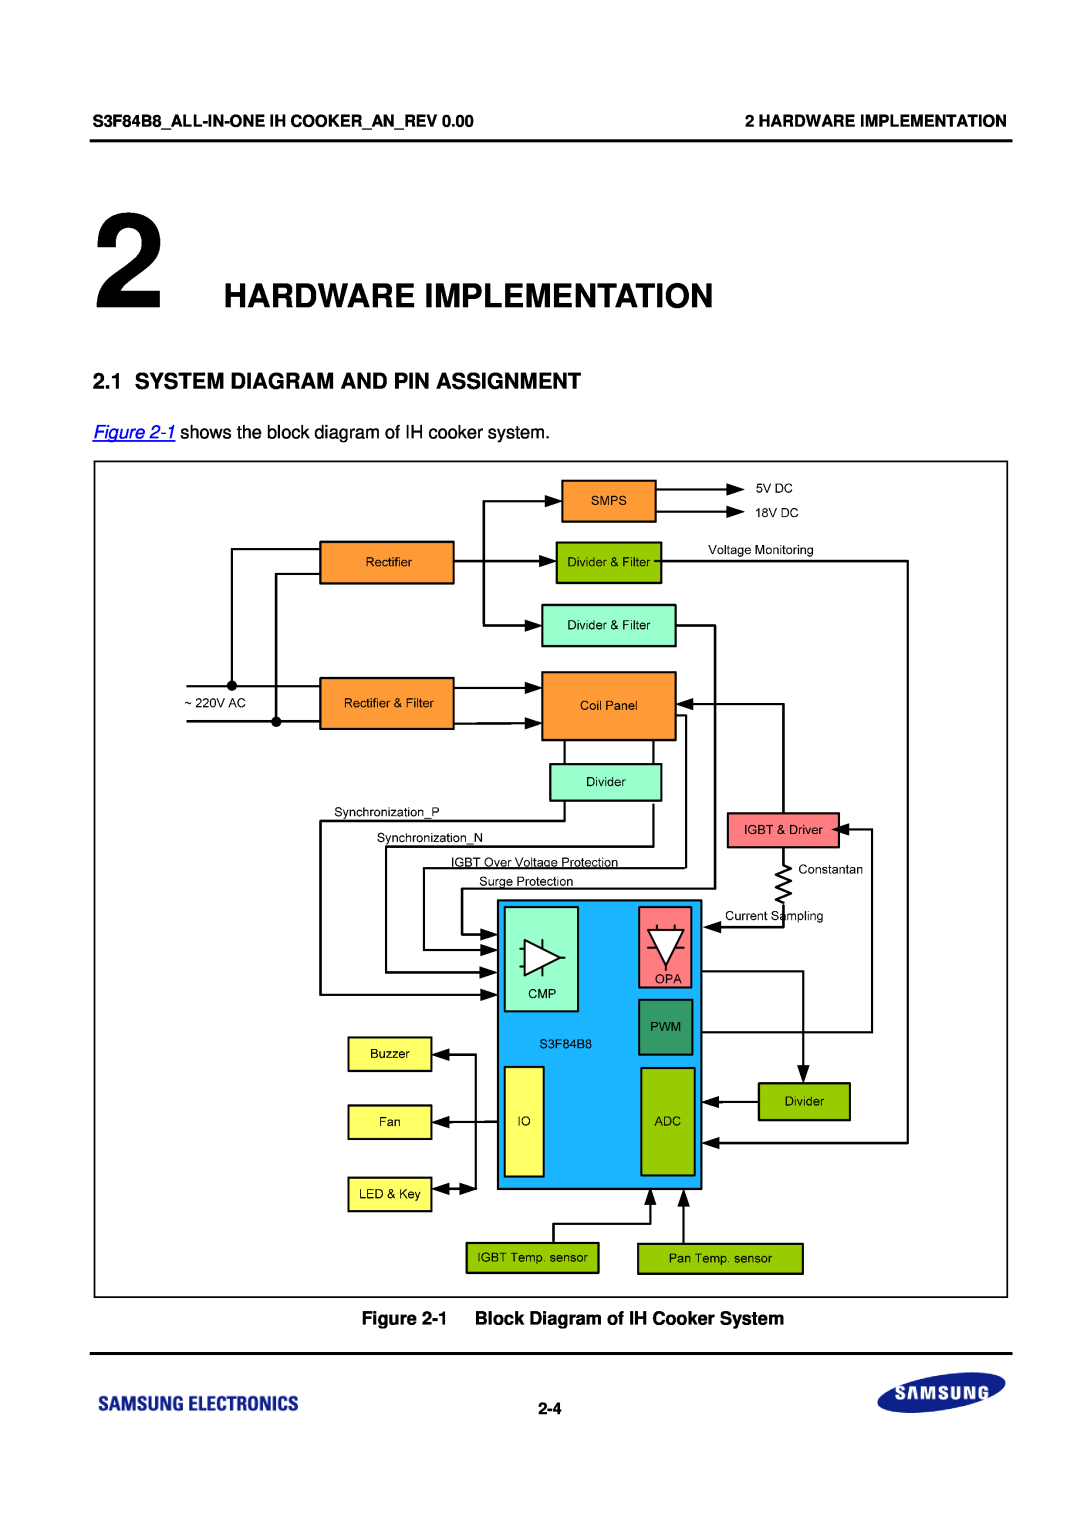 Samsung S3F84B8 manual Hardware Implementation, System Diagram And Pin Assignment, 1 Block Diagram of IH Cooker System 